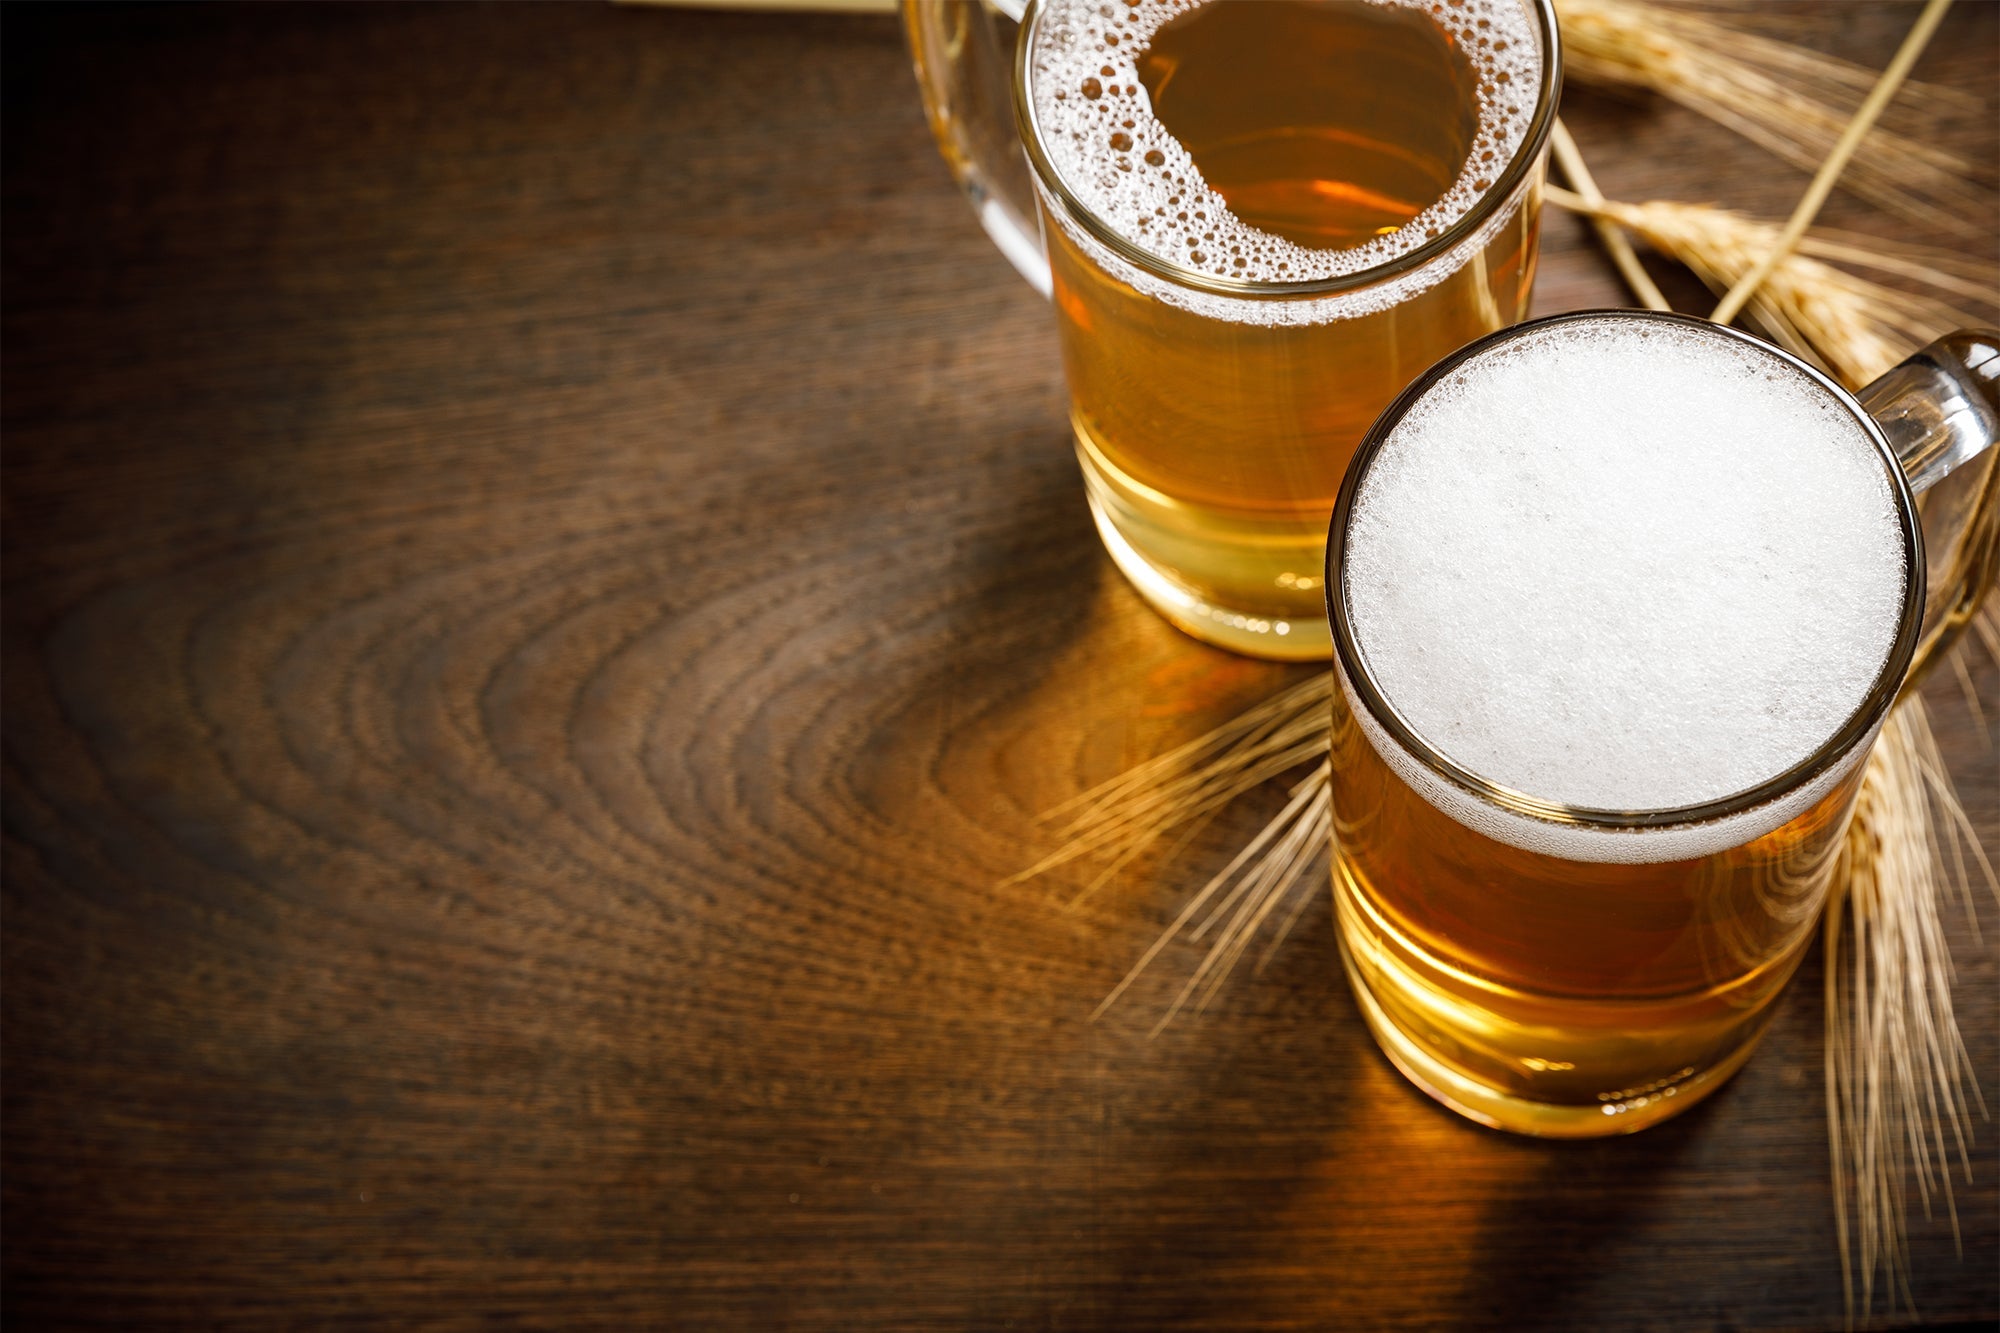 How does alcohol affect weight loss? 